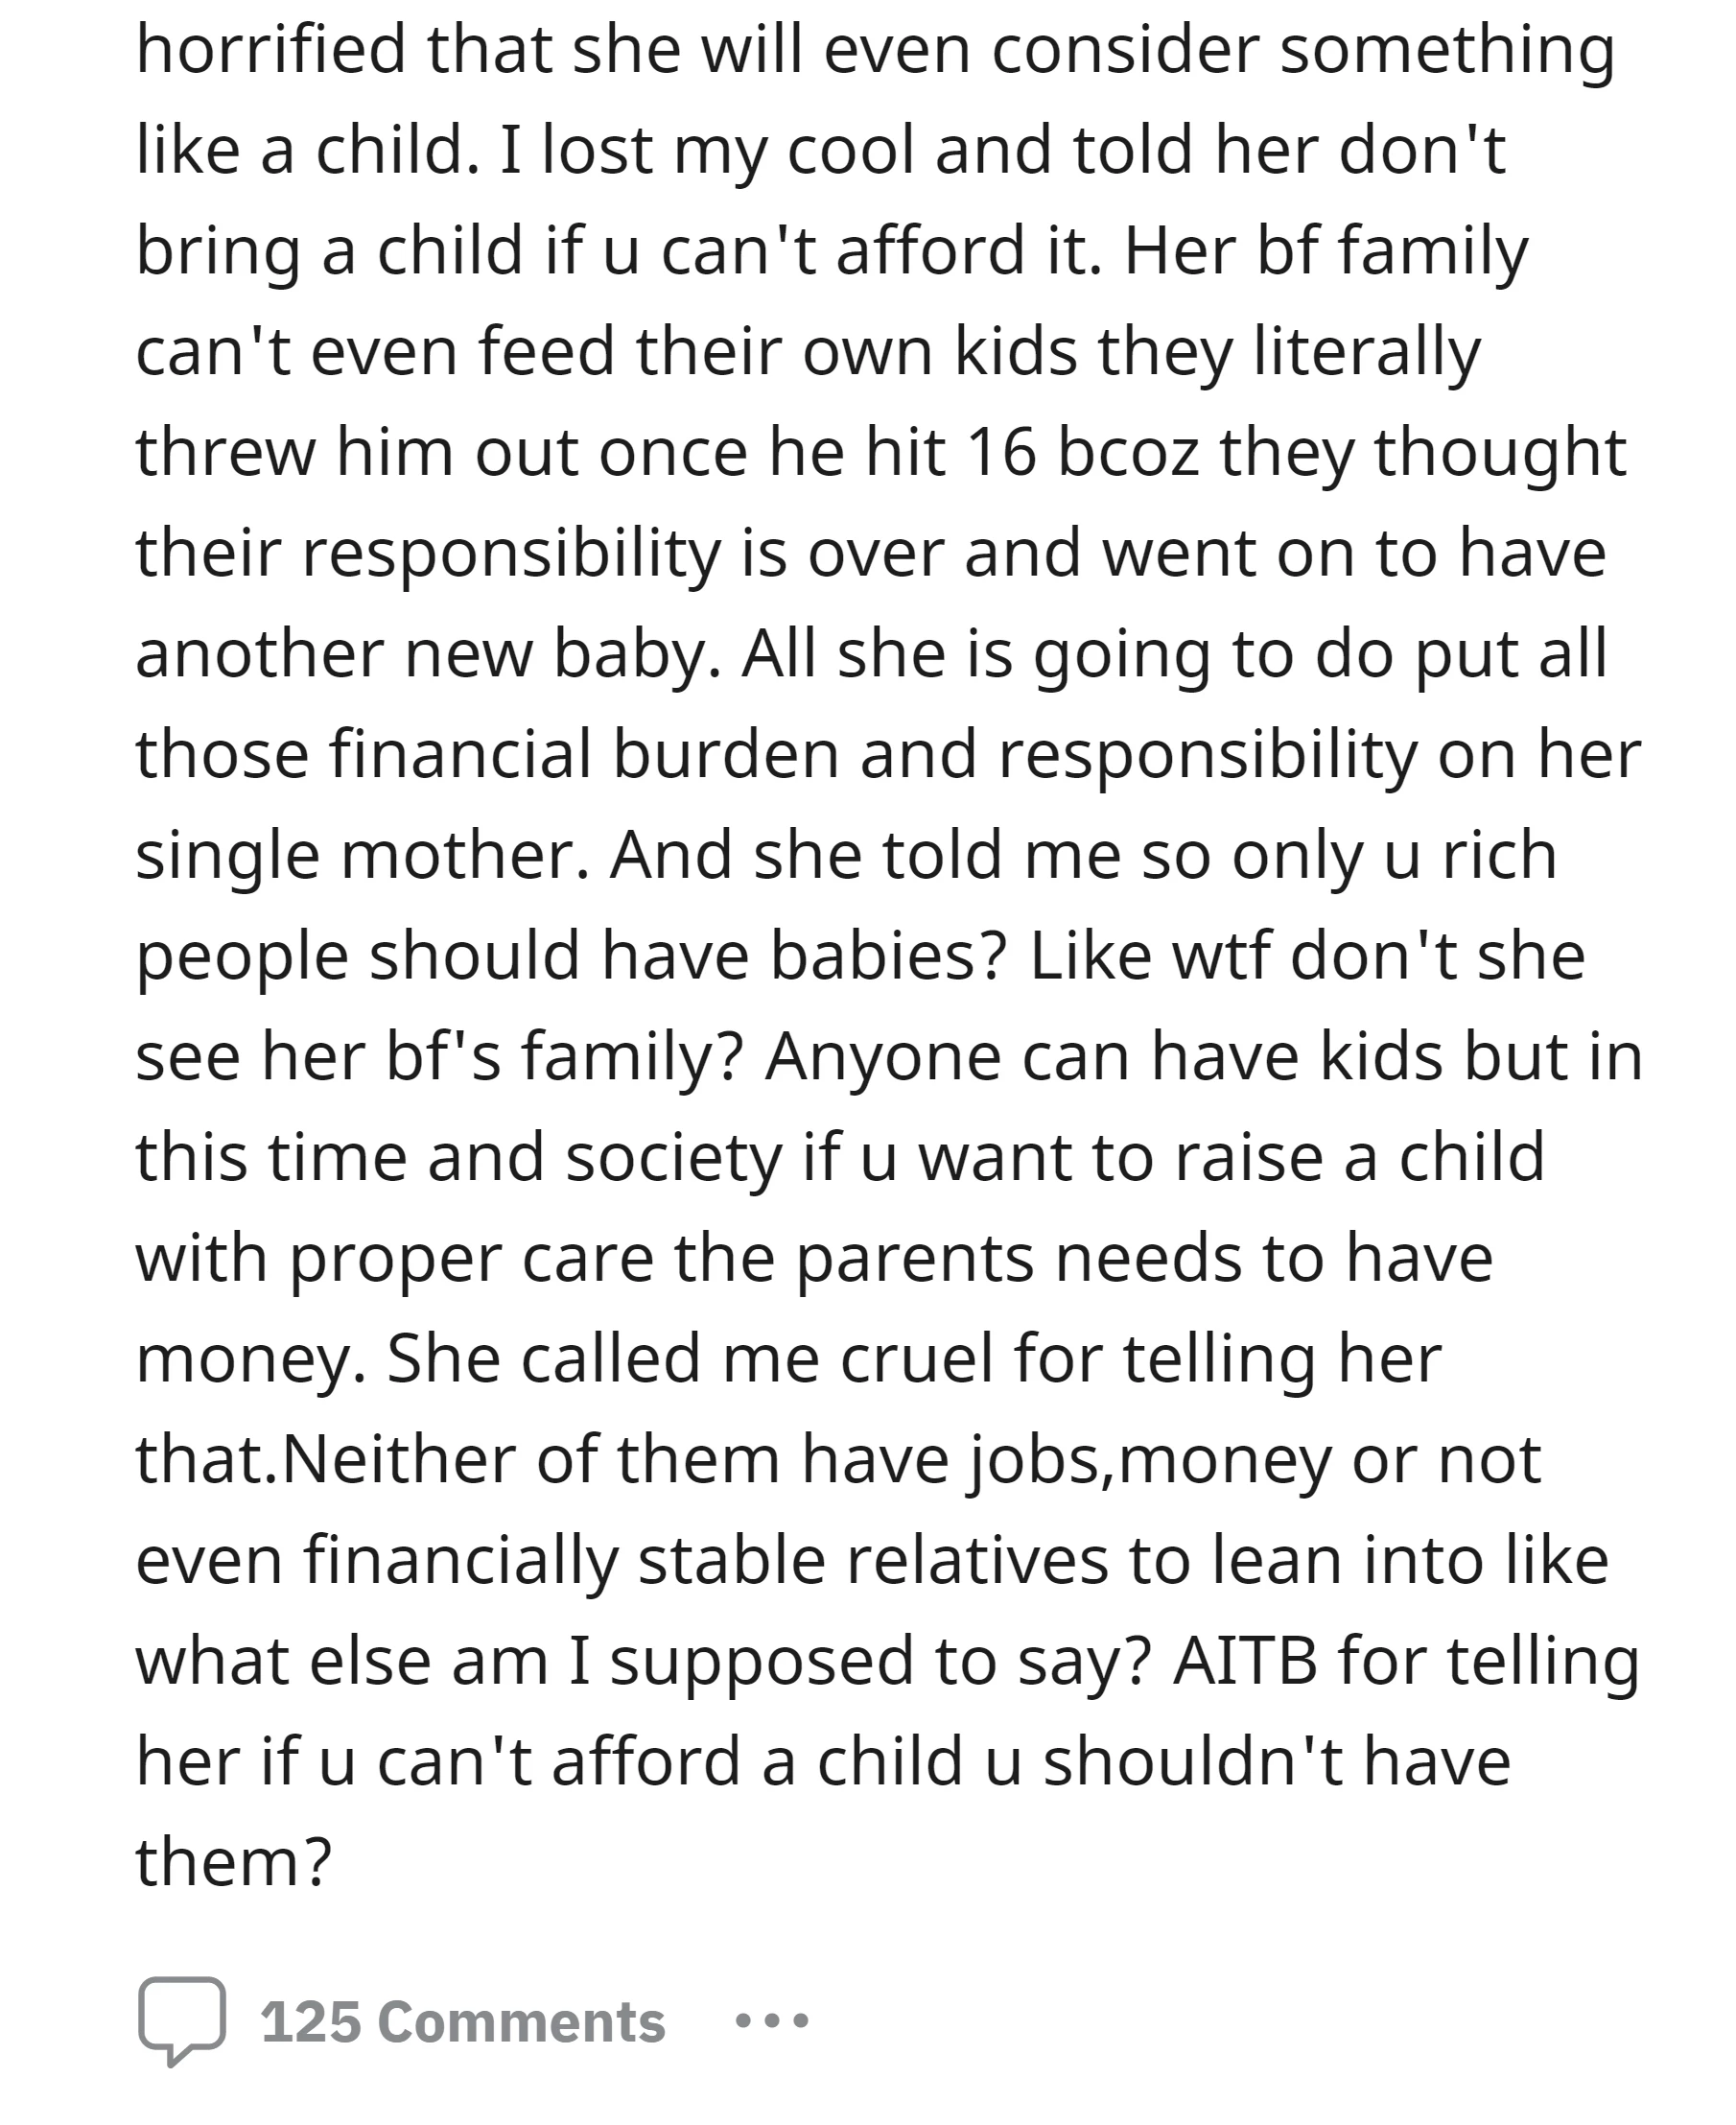 OP expressed concern to her friend, telling if she isn't rich, she shouldn't have kids. The friend called OP cruel